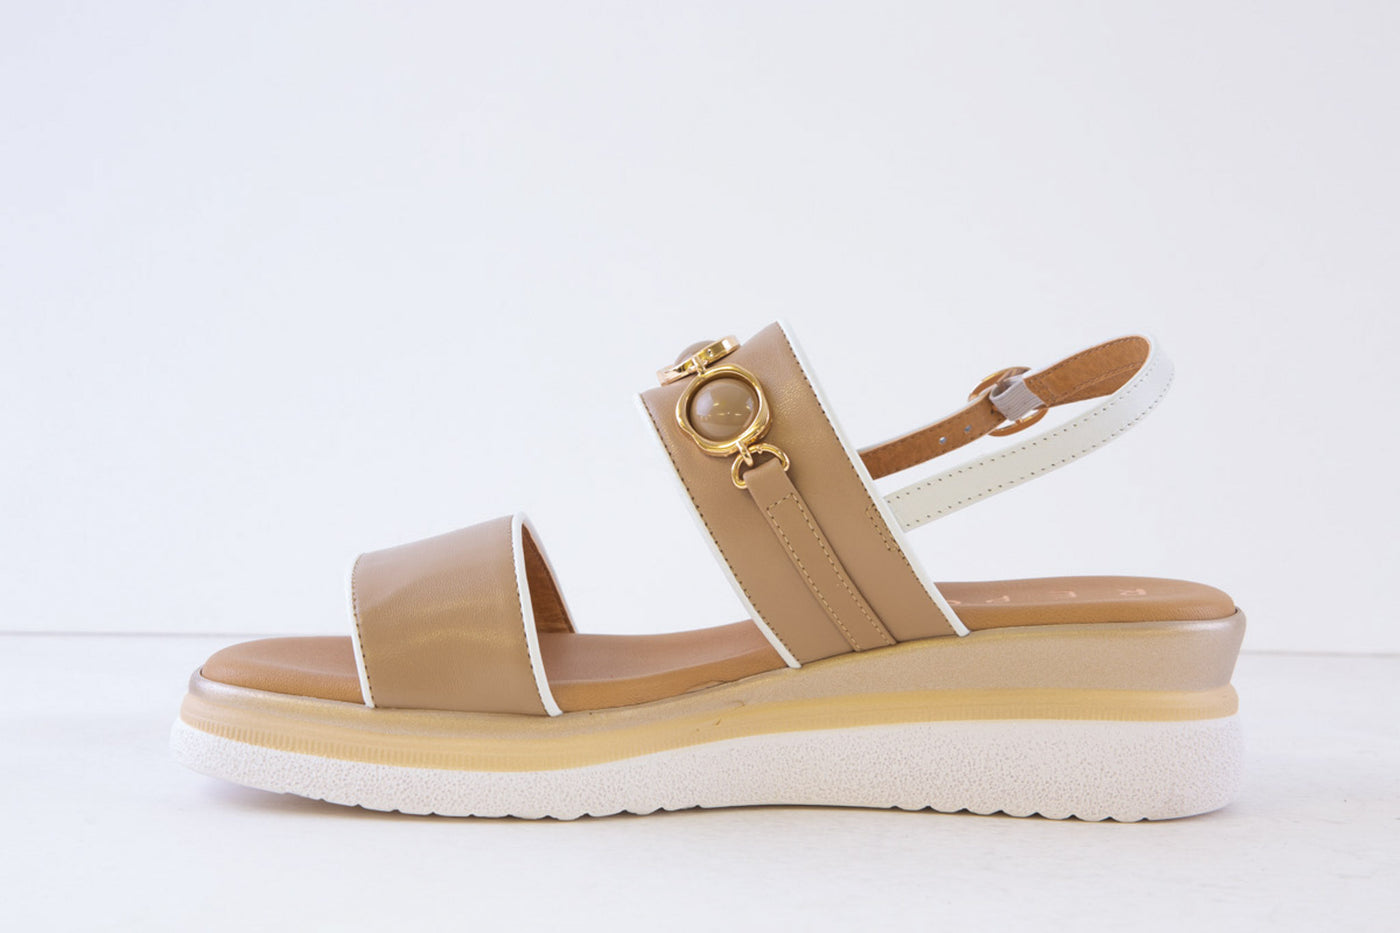 REPO - 10408 LOW WEDGE SANDAL - TAUPE